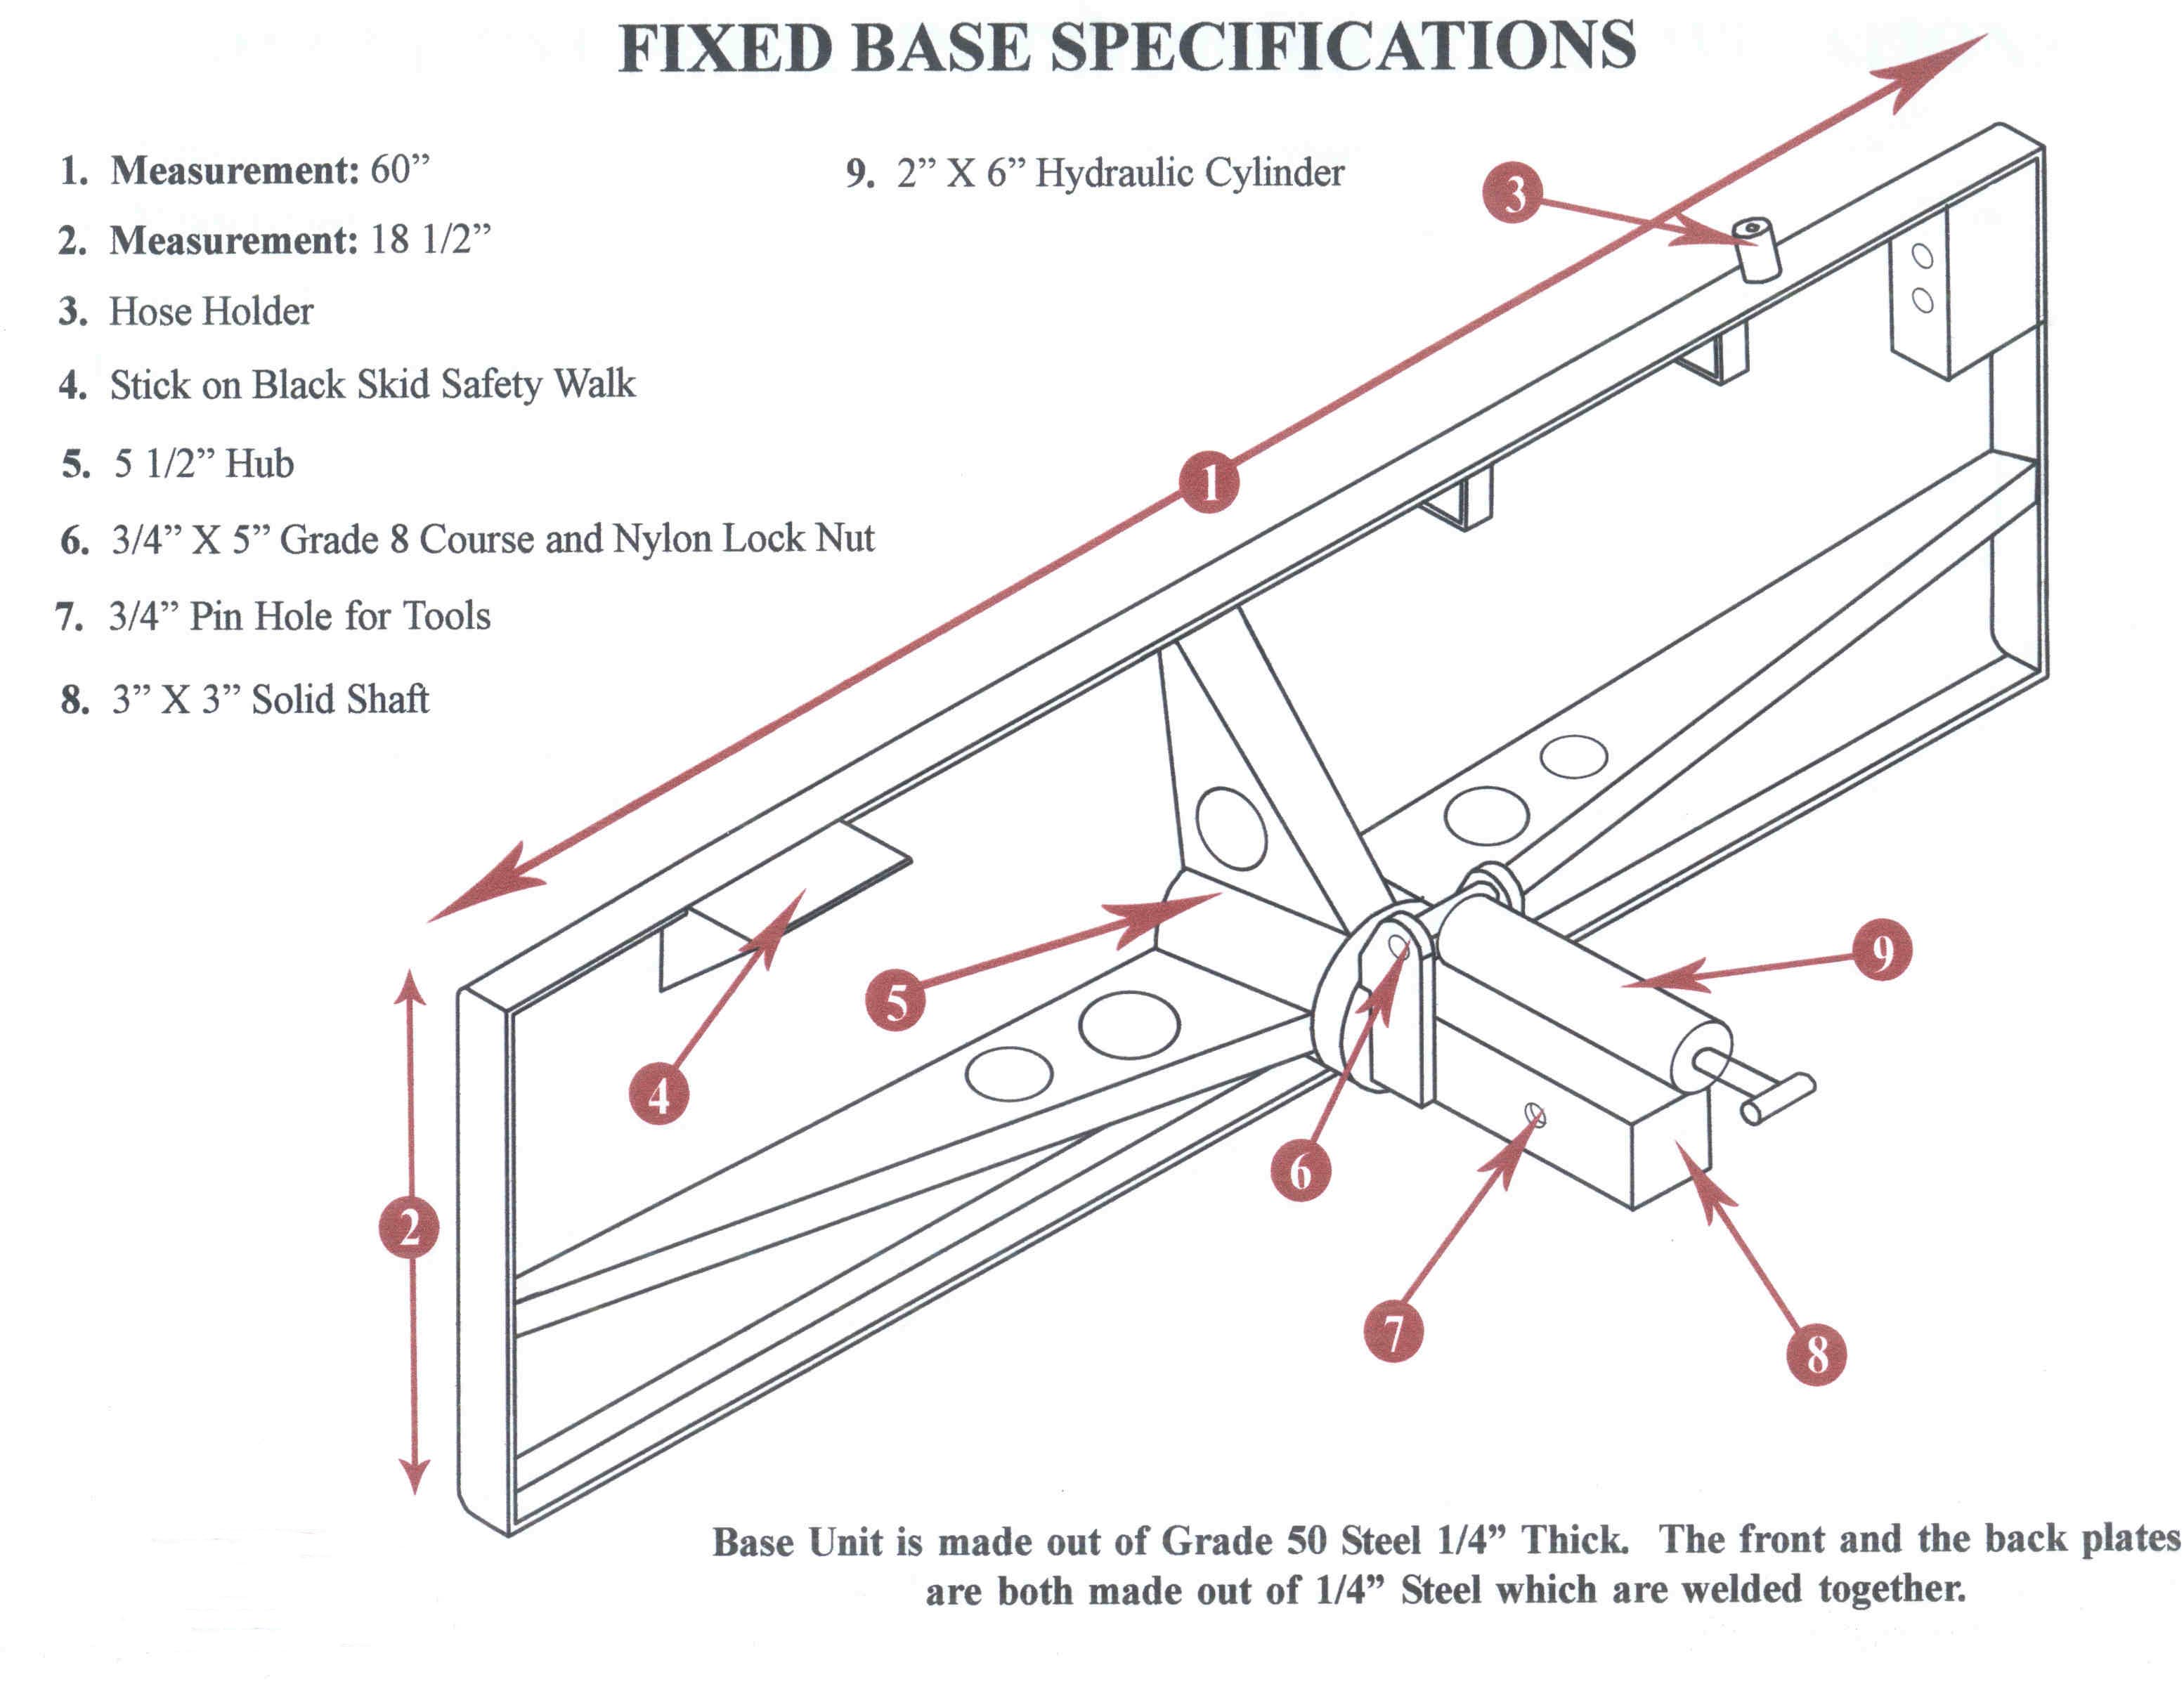 Specifications On Fixed Base Plate